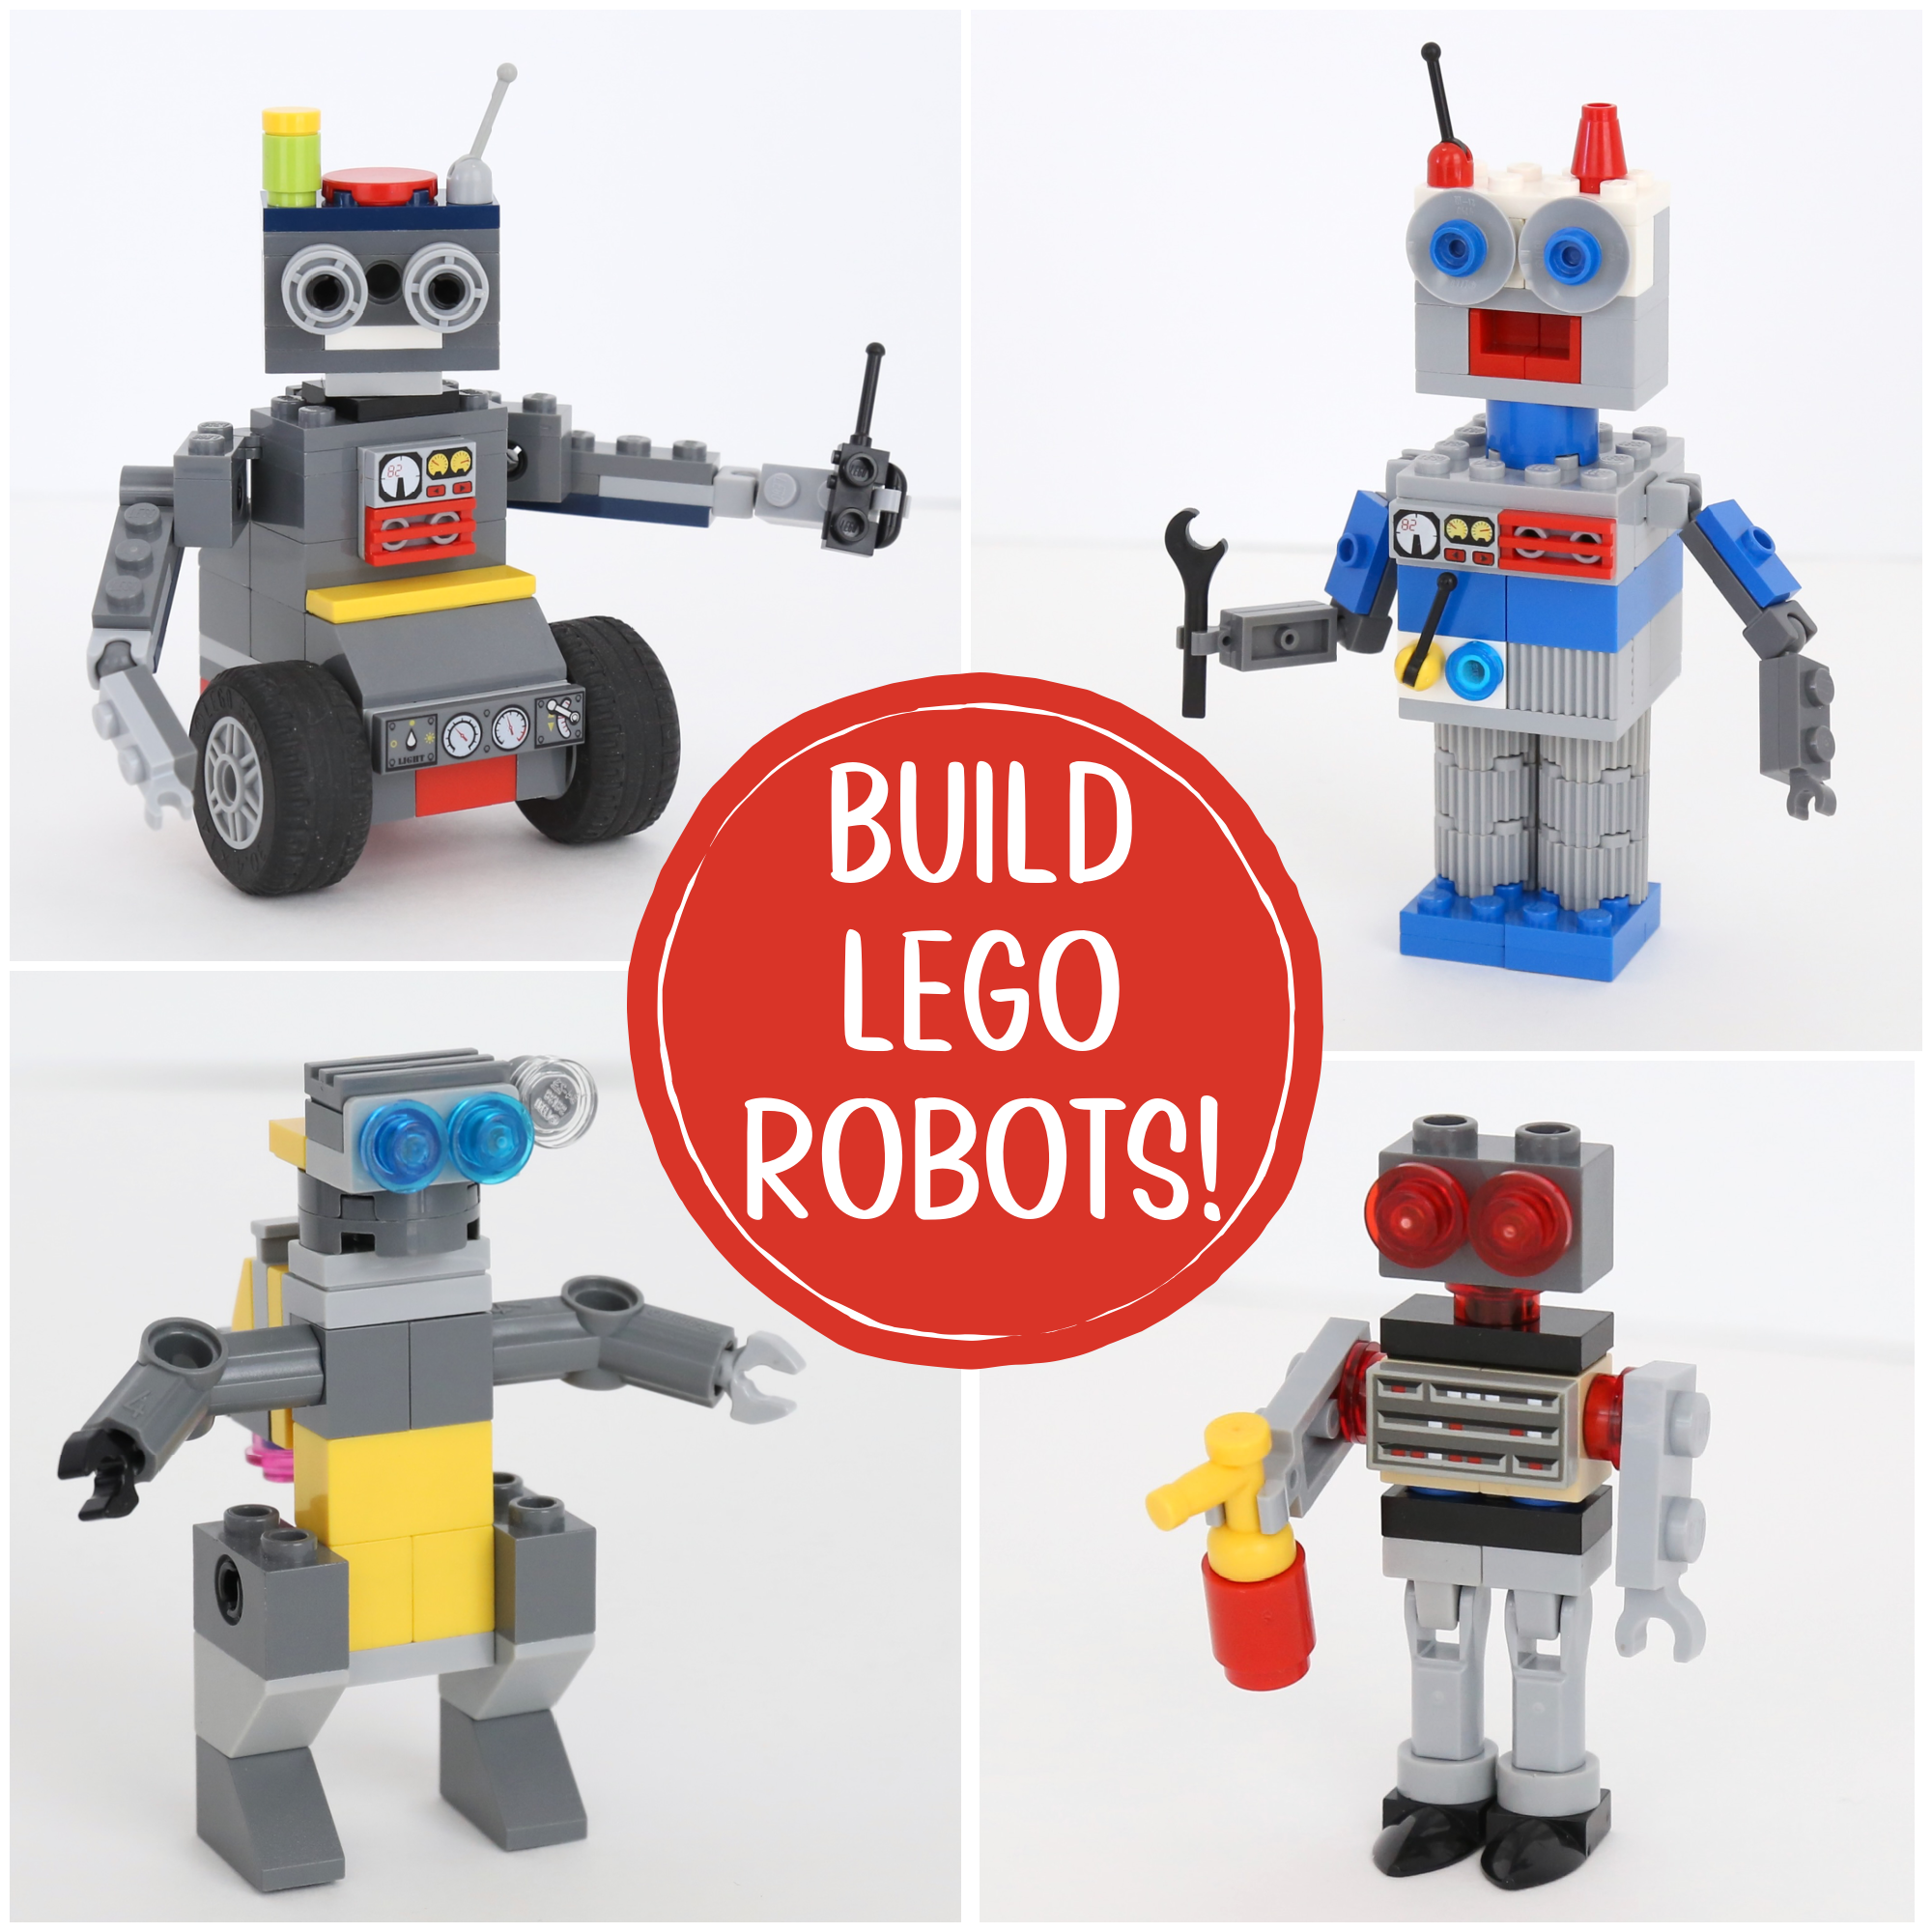 How to Build Cool LEGO Robots - Frugal Fun For Boys and Girls